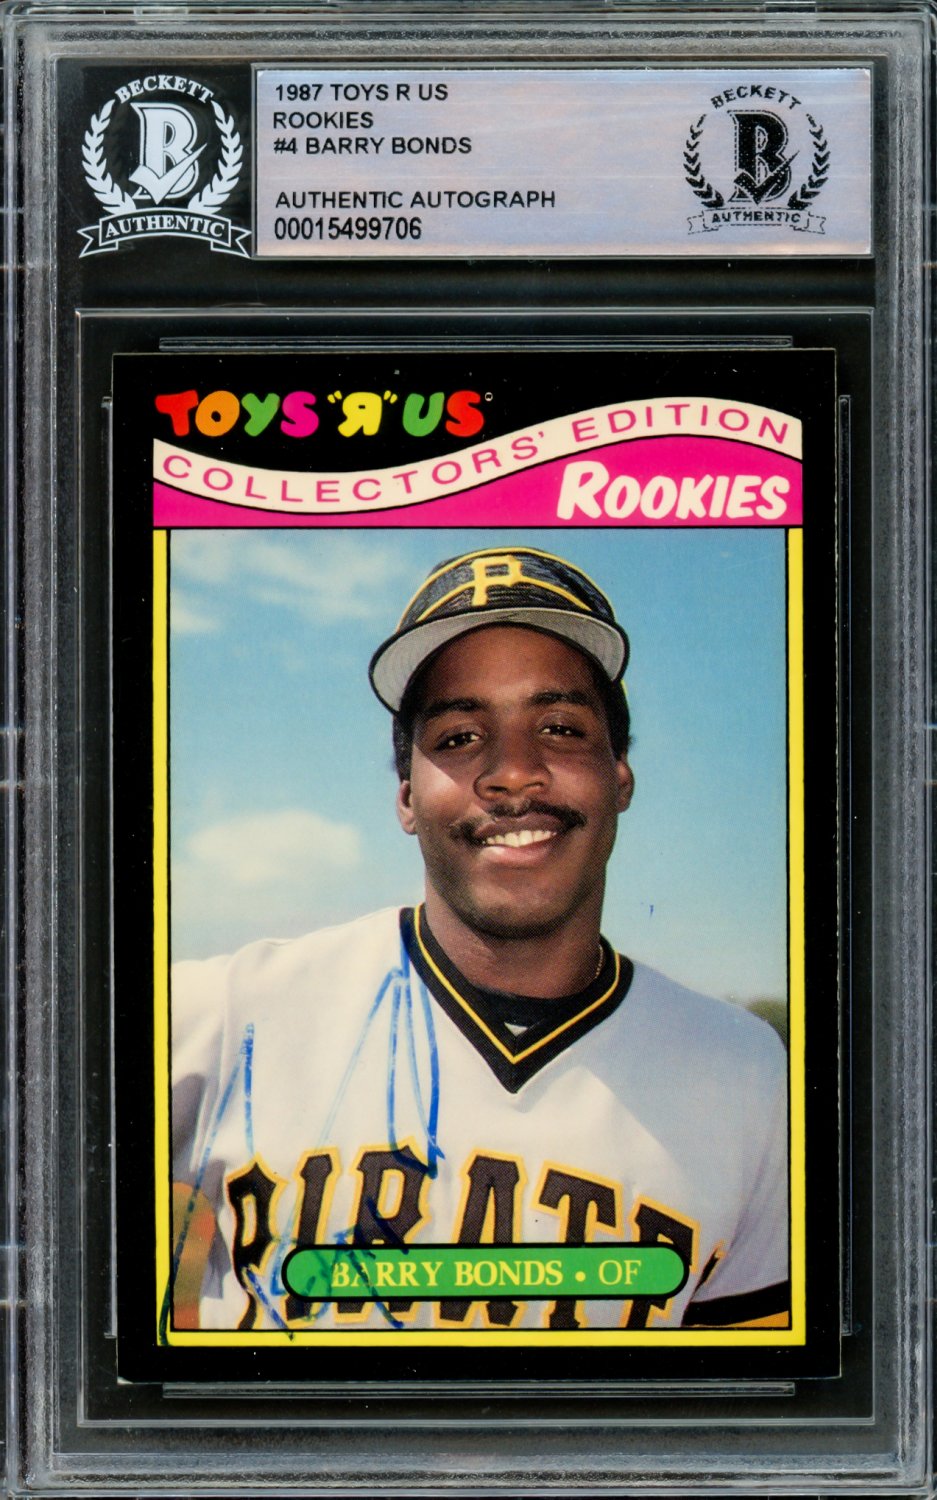 Barry Bonds Autographed Signed 1987 Topps Toys R Us Rookie Card #4